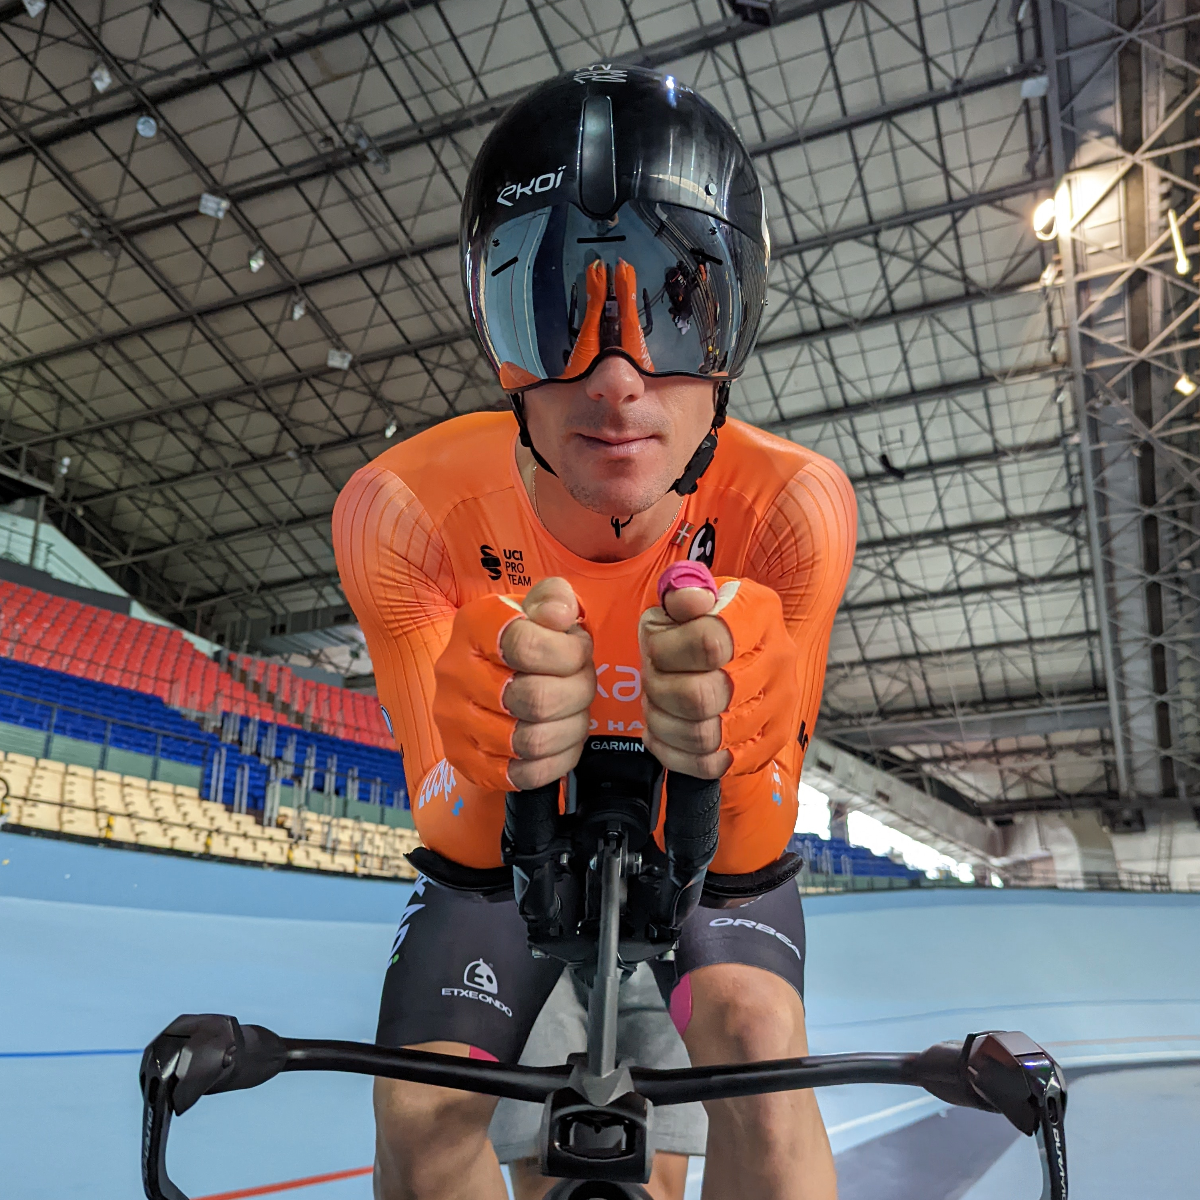 Track cycling with aerosensor for performance tracking